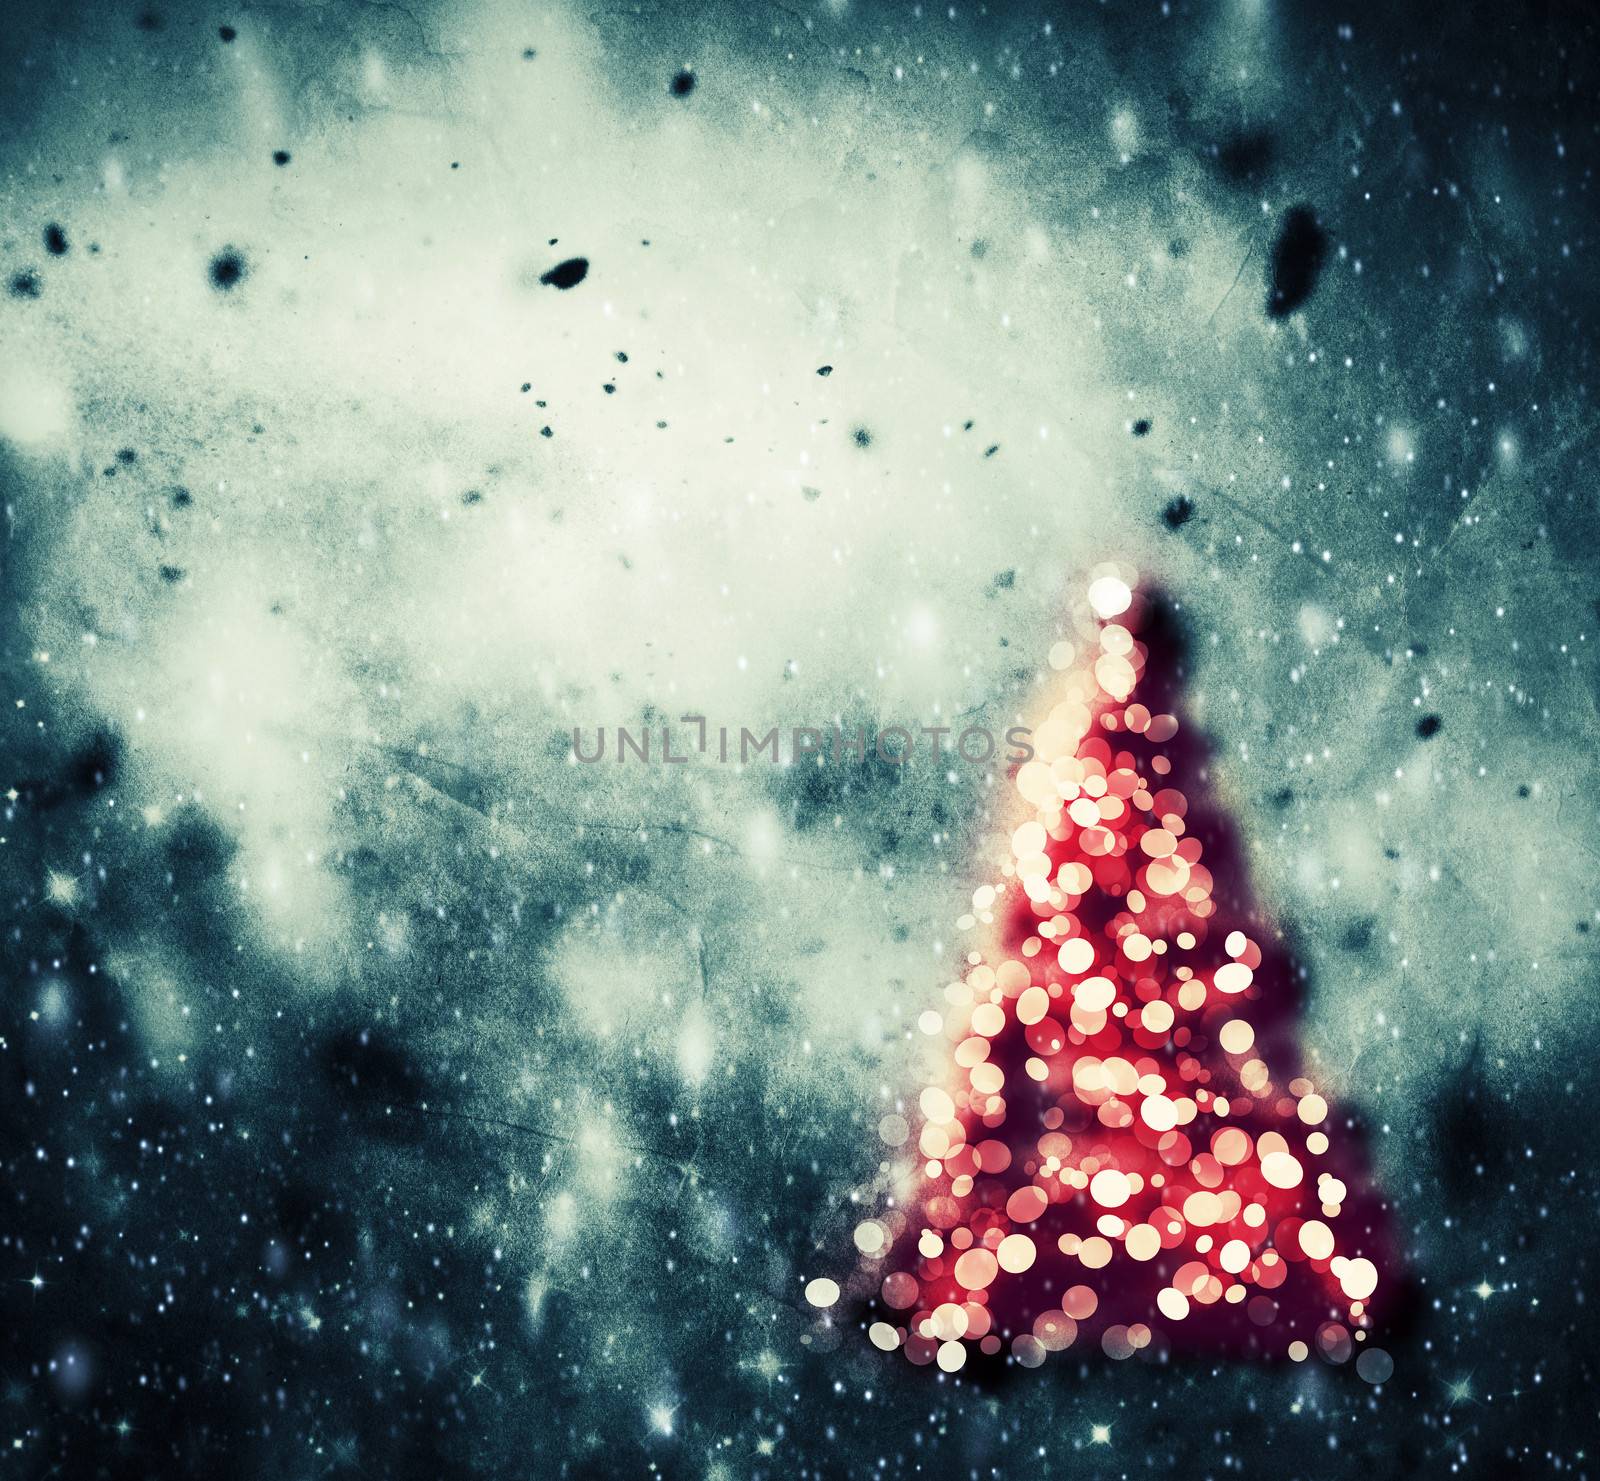 Christmas tree glowing on winter background with snow storm, frost, glittering lights. Vintage texture.